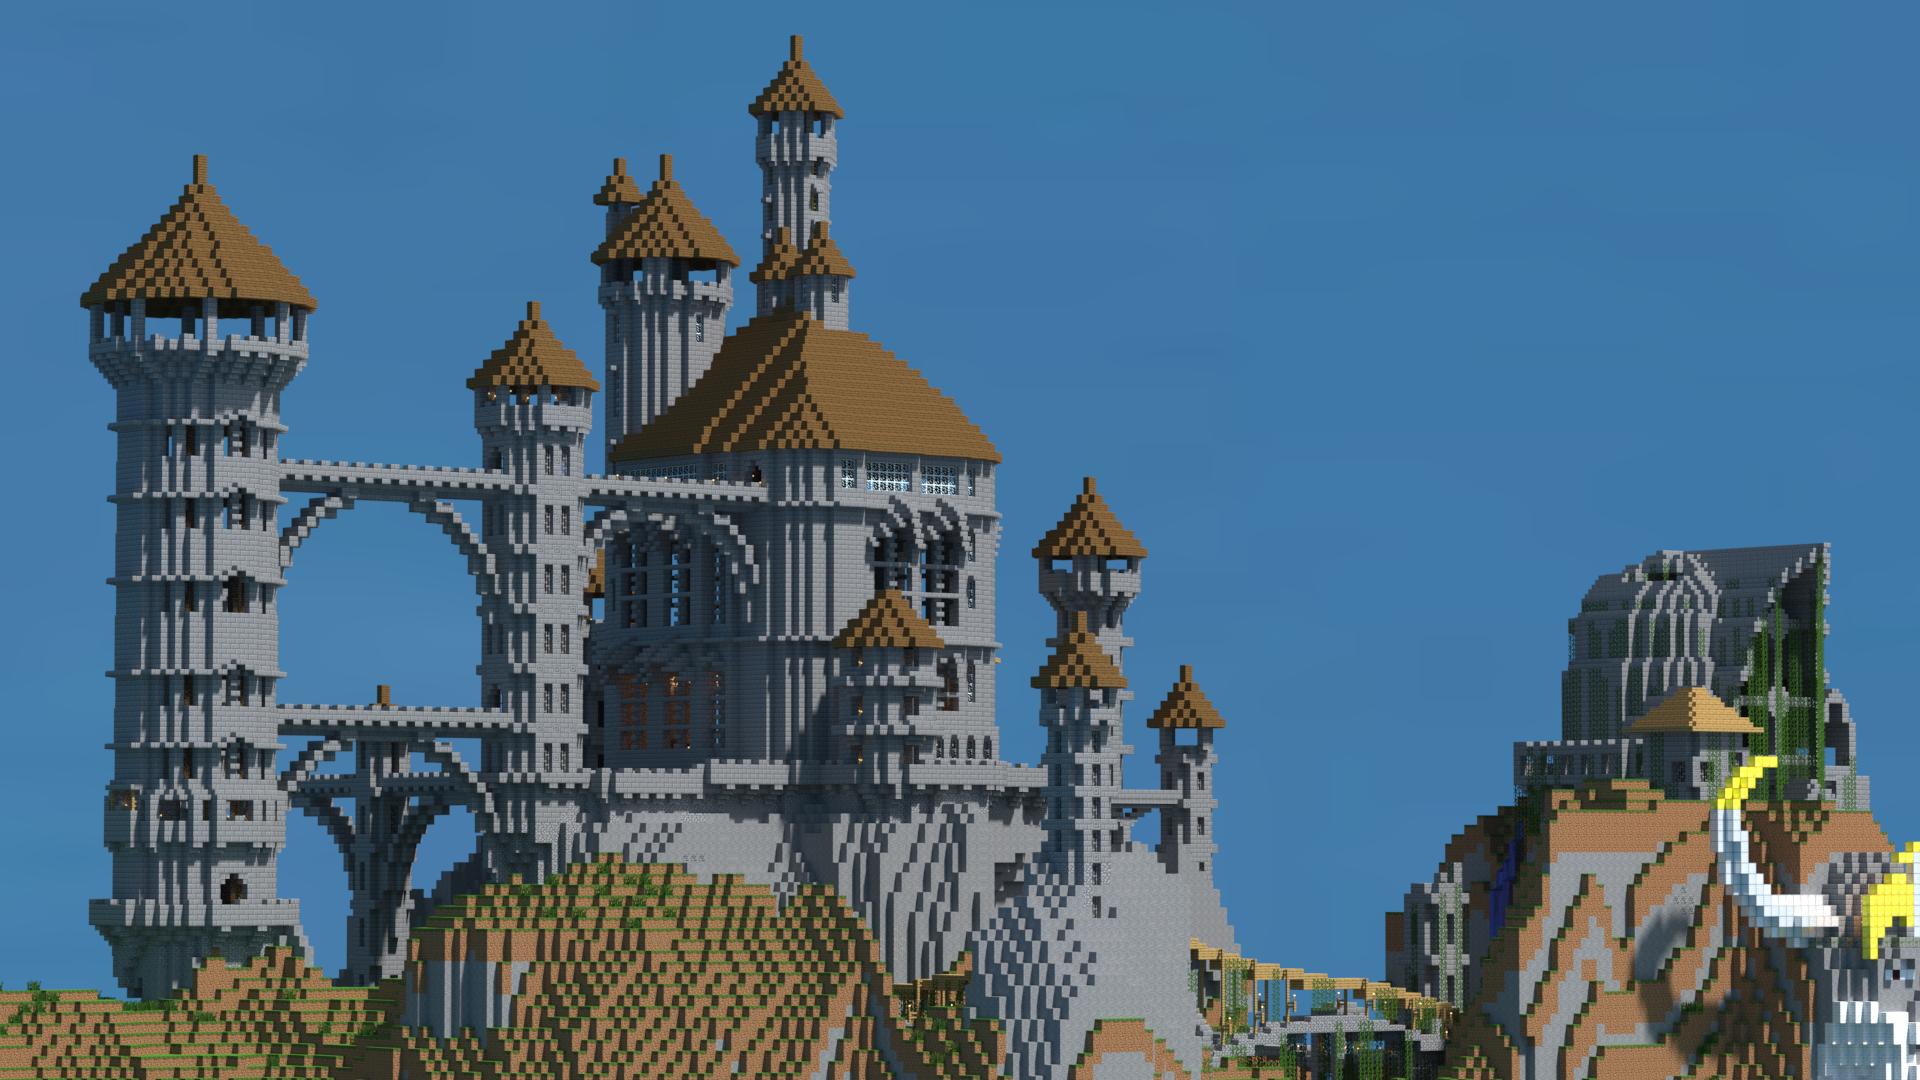 minecraft castle Wallpapers